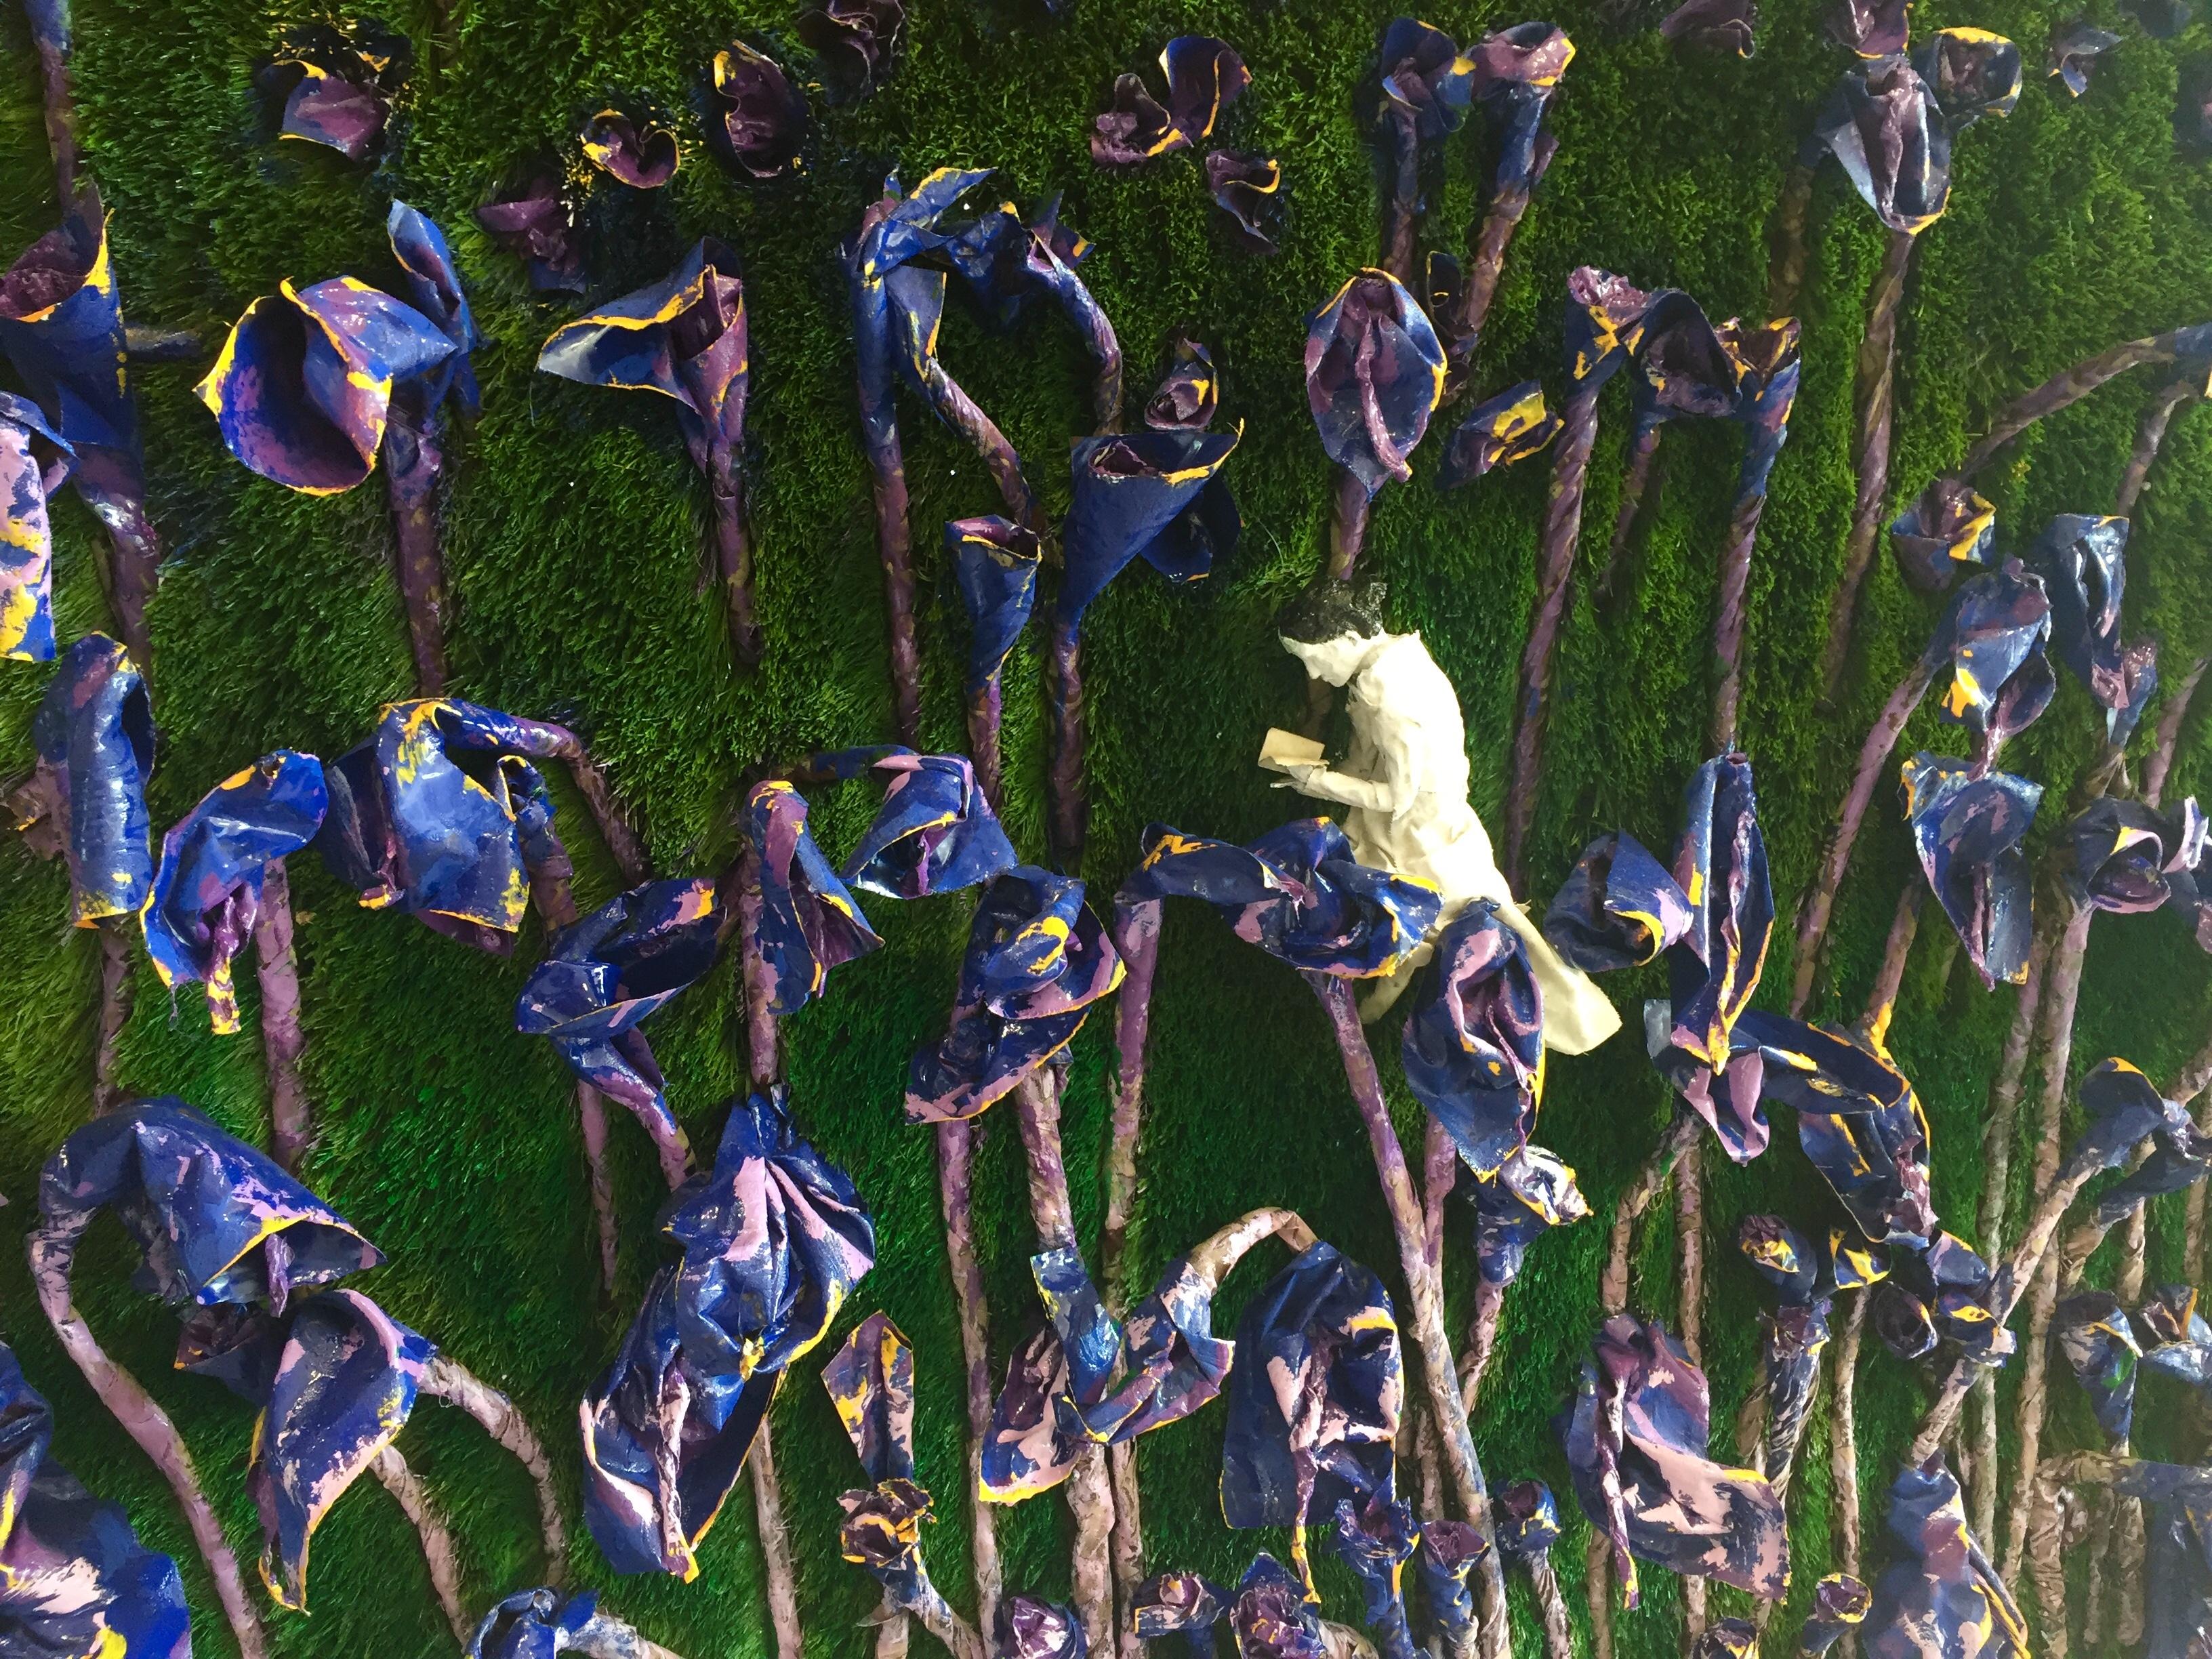 My Letter to the World (Large 3D Purple Irises, Woman Reading among Flowers) - Contemporary Mixed Media Art by Olga Andrino